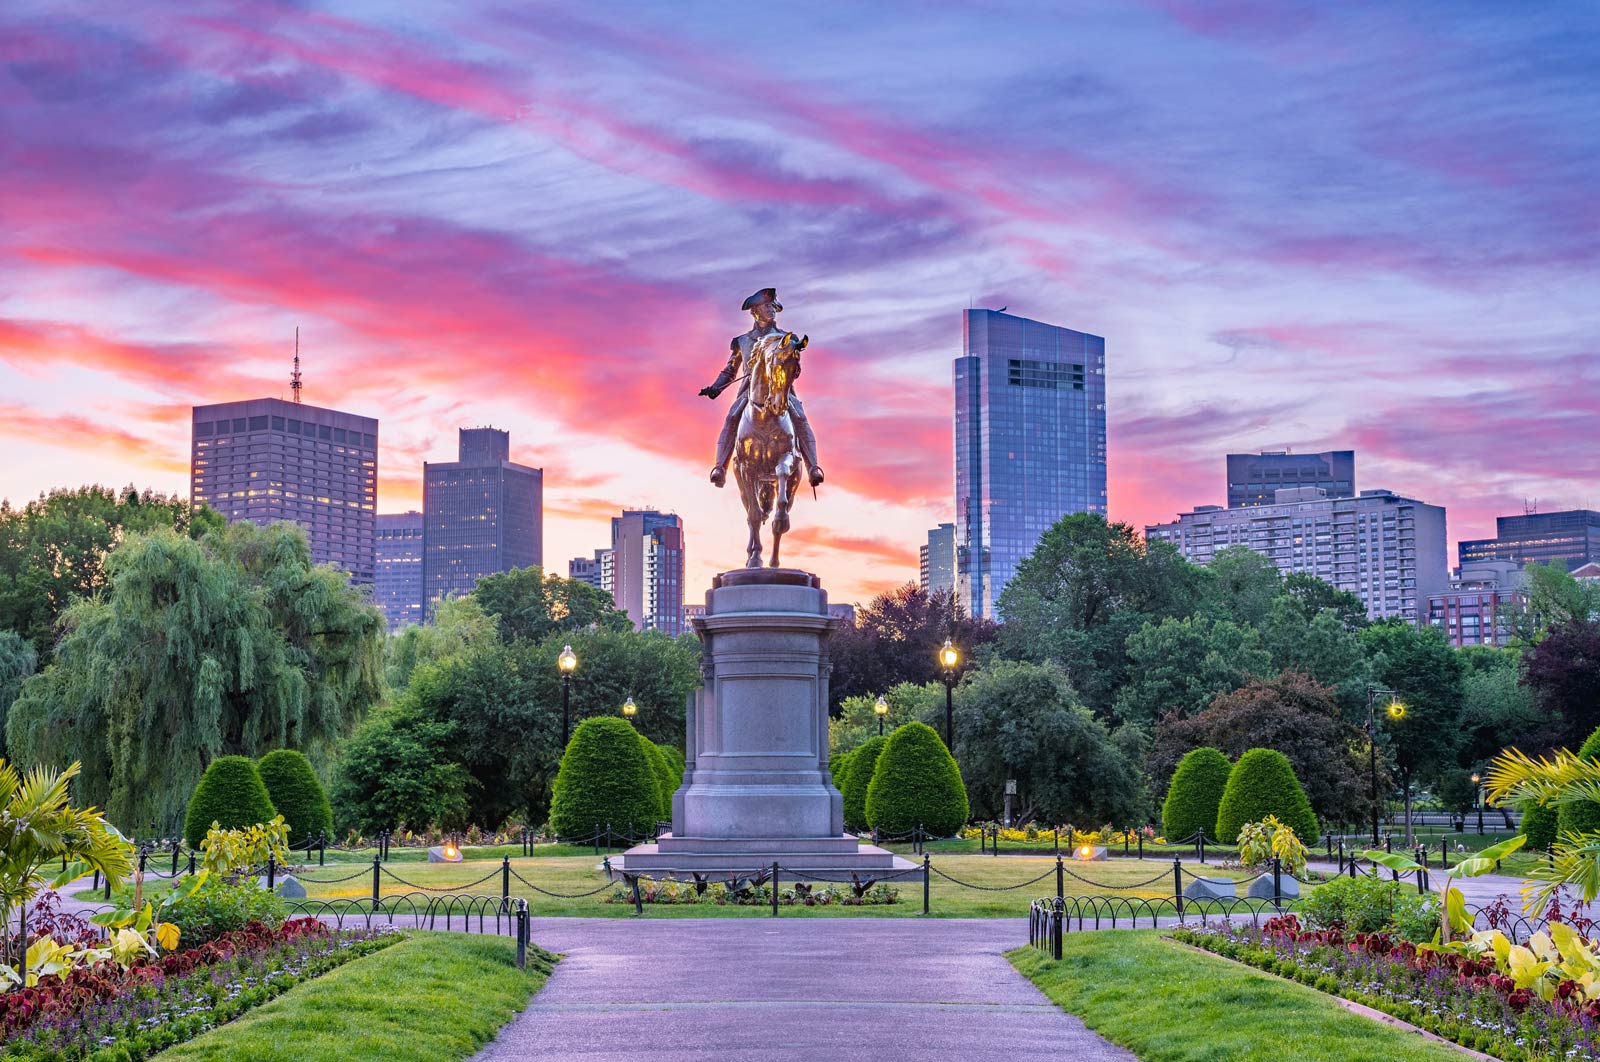 34 Cool Things to do in Boston in 2022